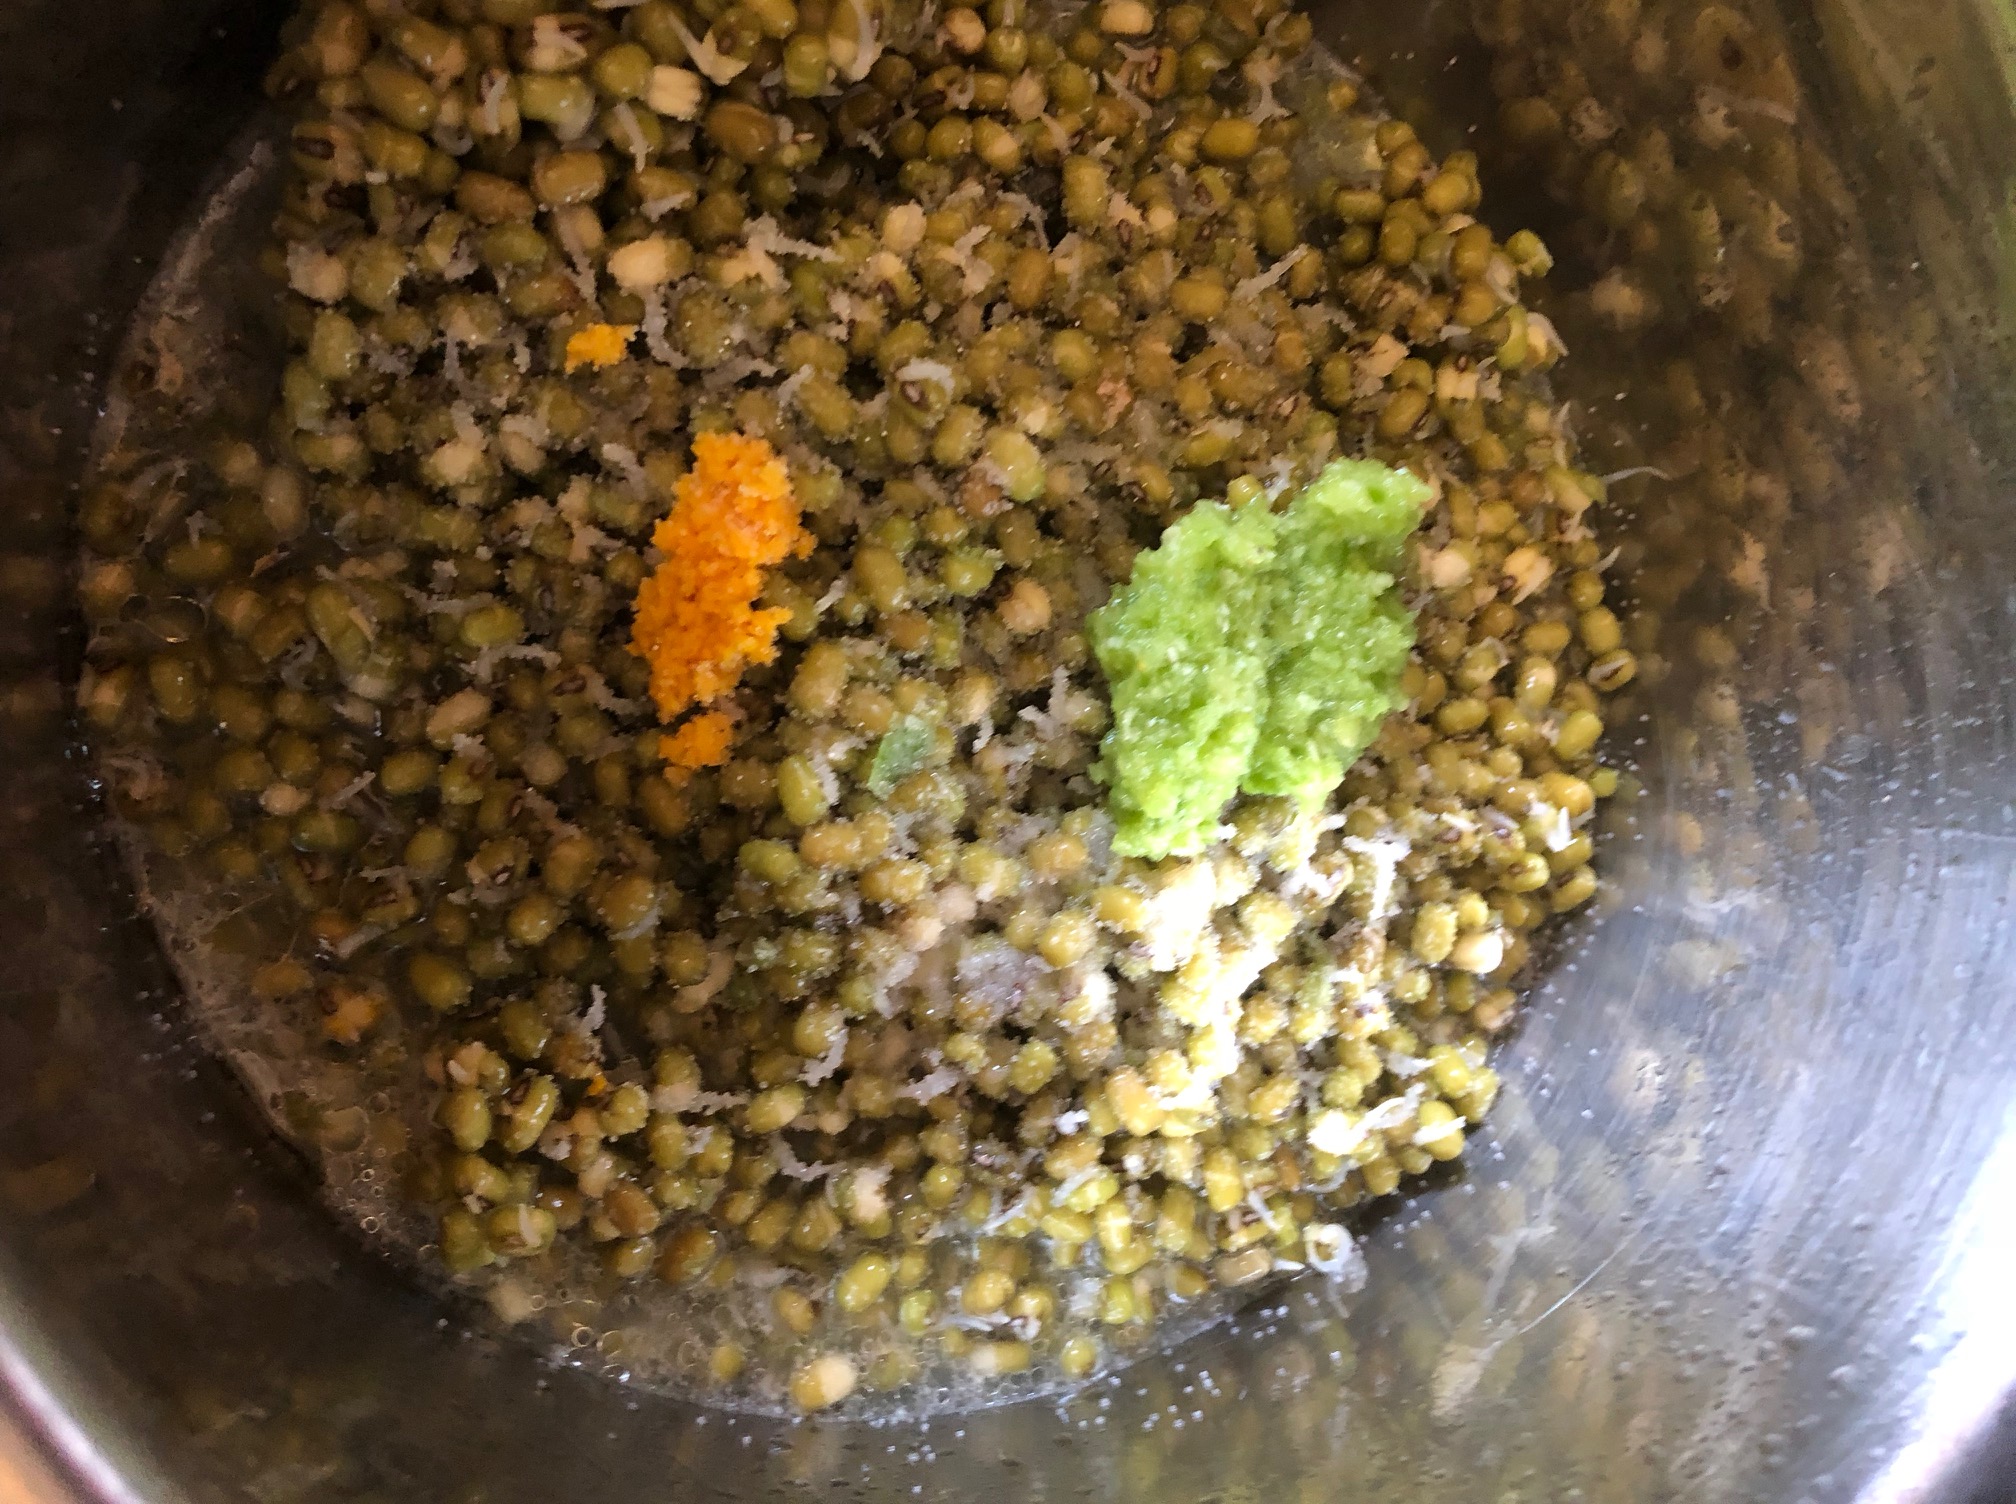 fresh turmeric and green chili and garlic added to the sprouted mung beans